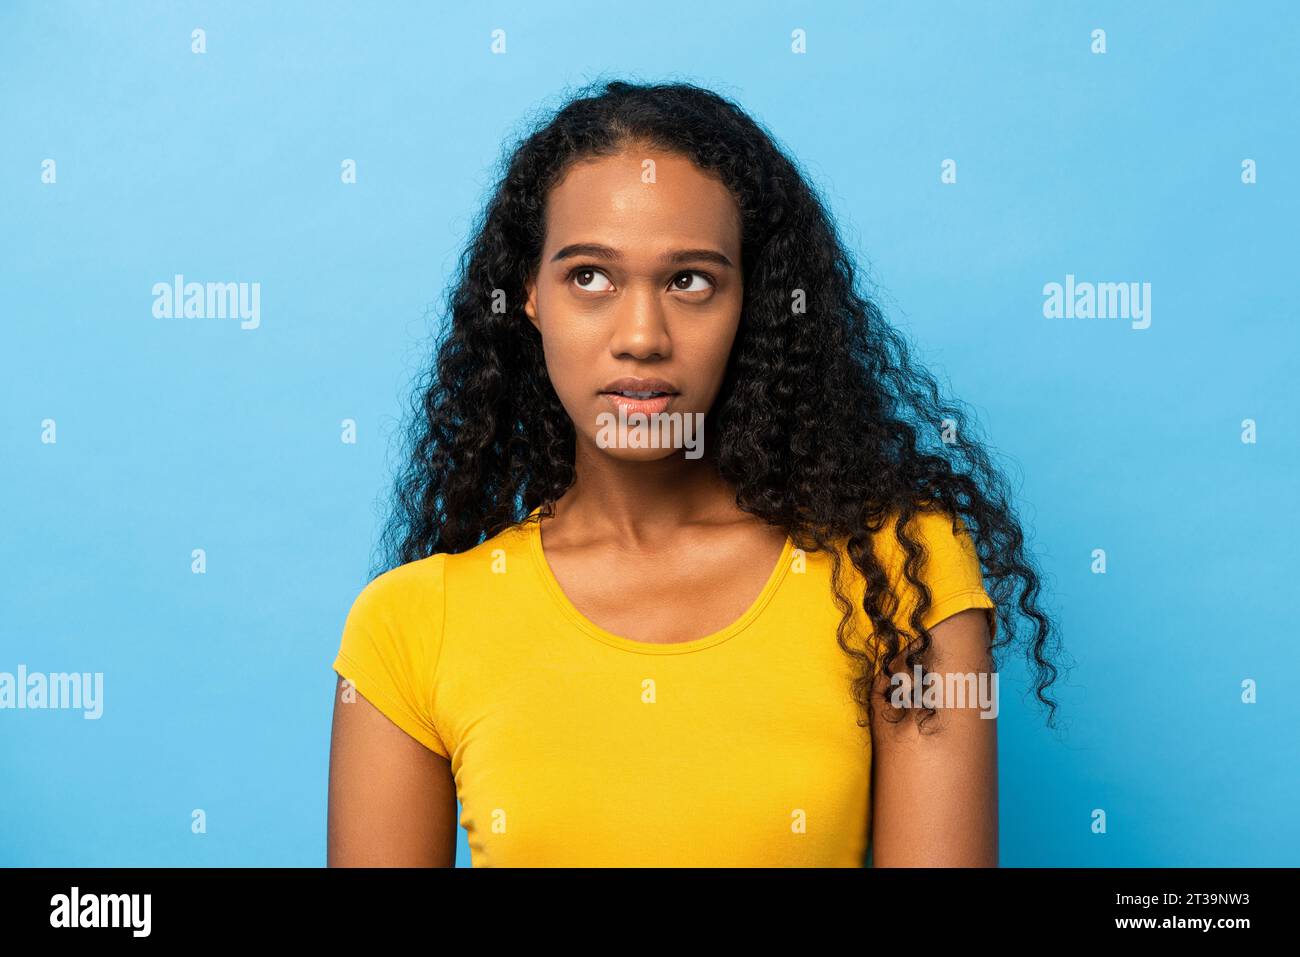 Portrait of mixed race African woman thinking with eyes looking up in light blue studio isolated background Stock Photo